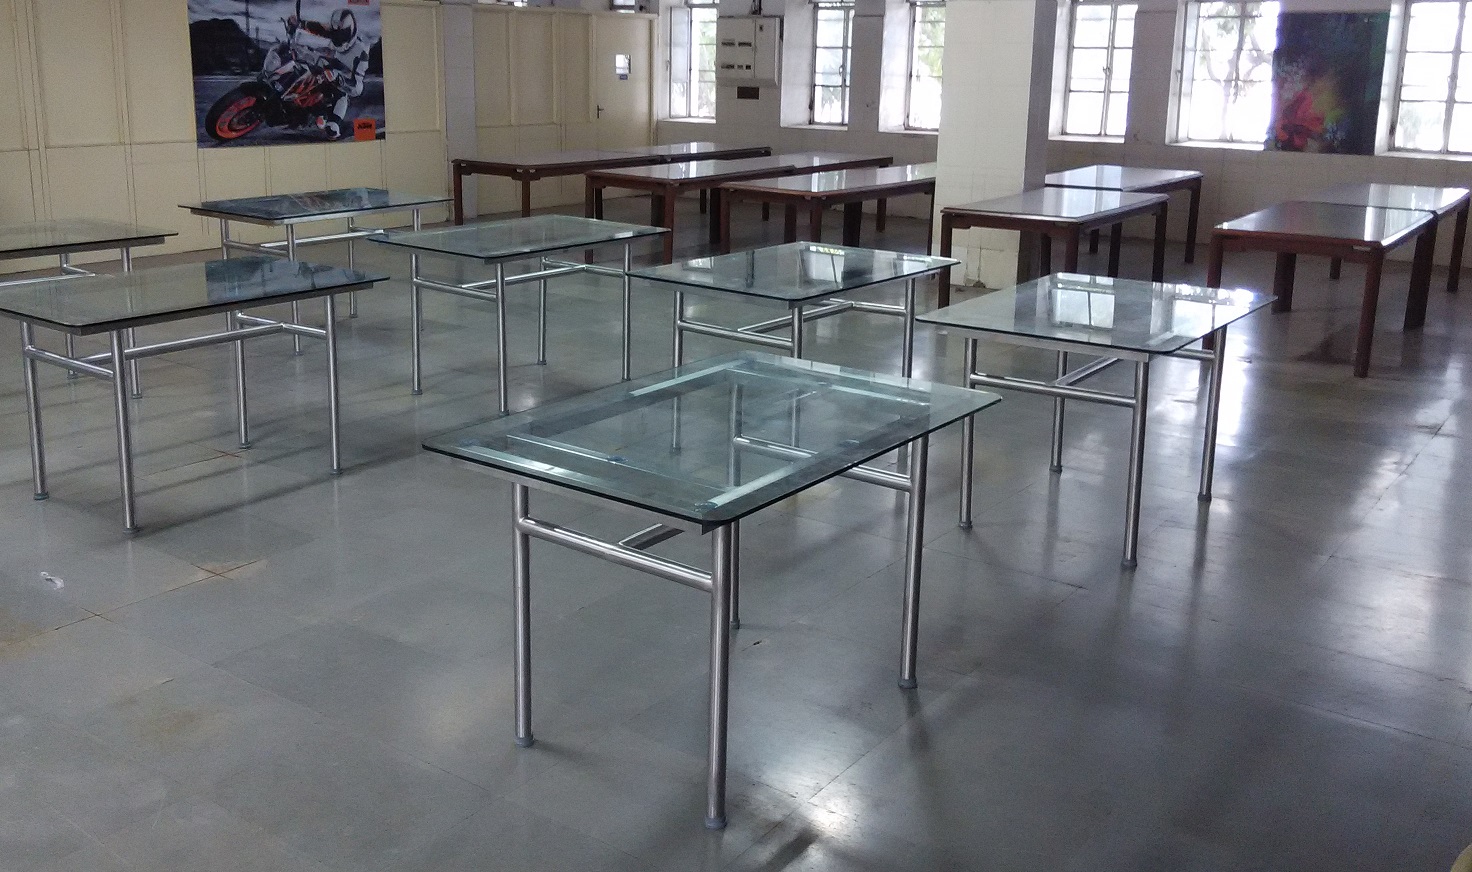 4/6 SEATER DINING TABLE with Glass Top